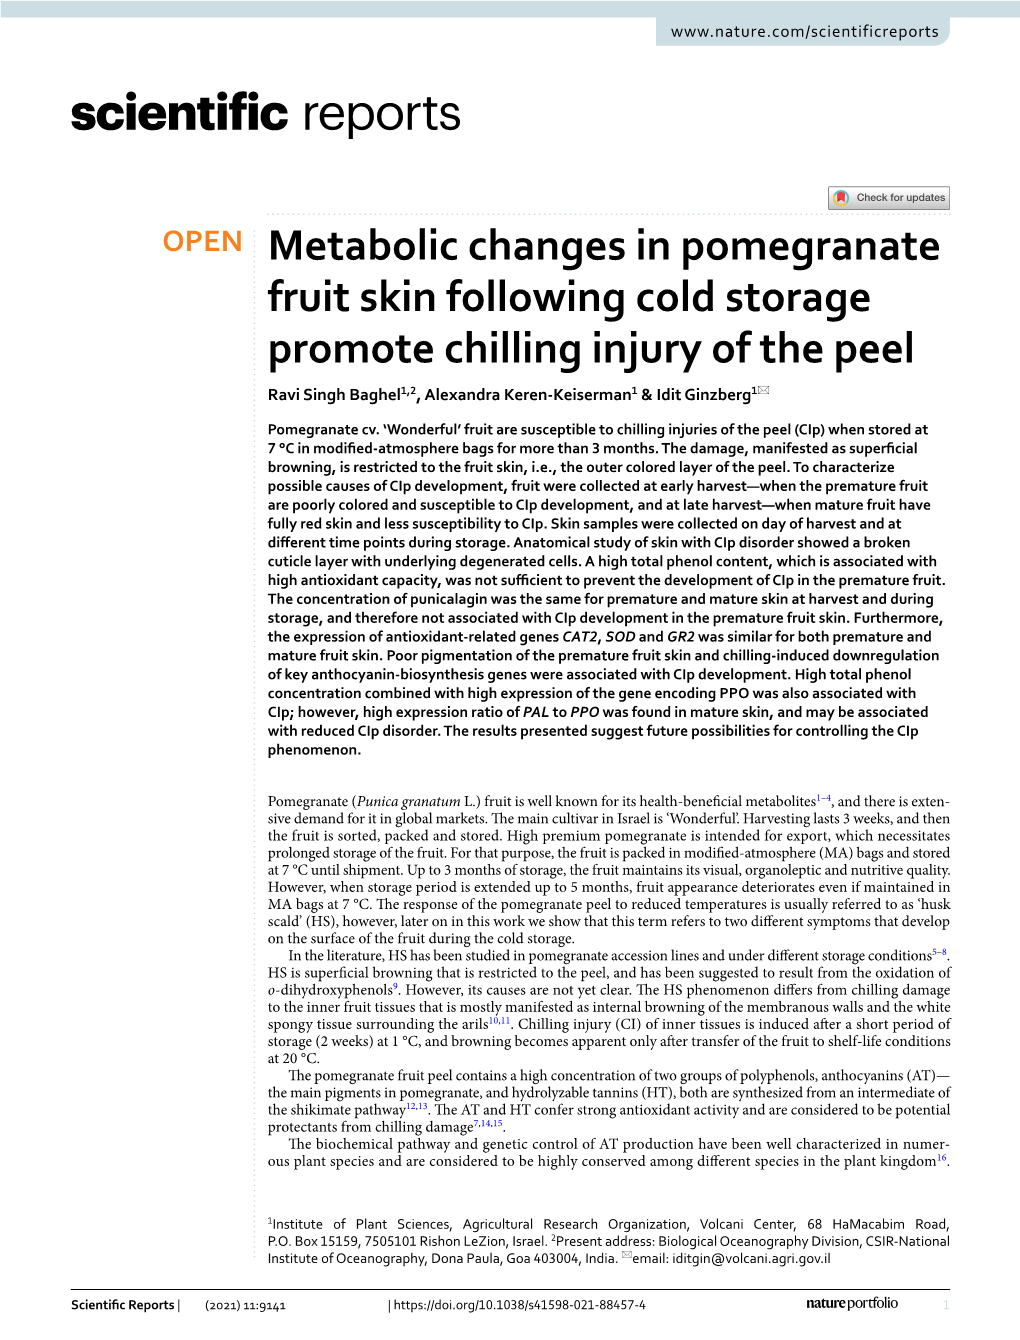 Metabolic Changes in Pomegranate Fruit Skin Following Cold Storage